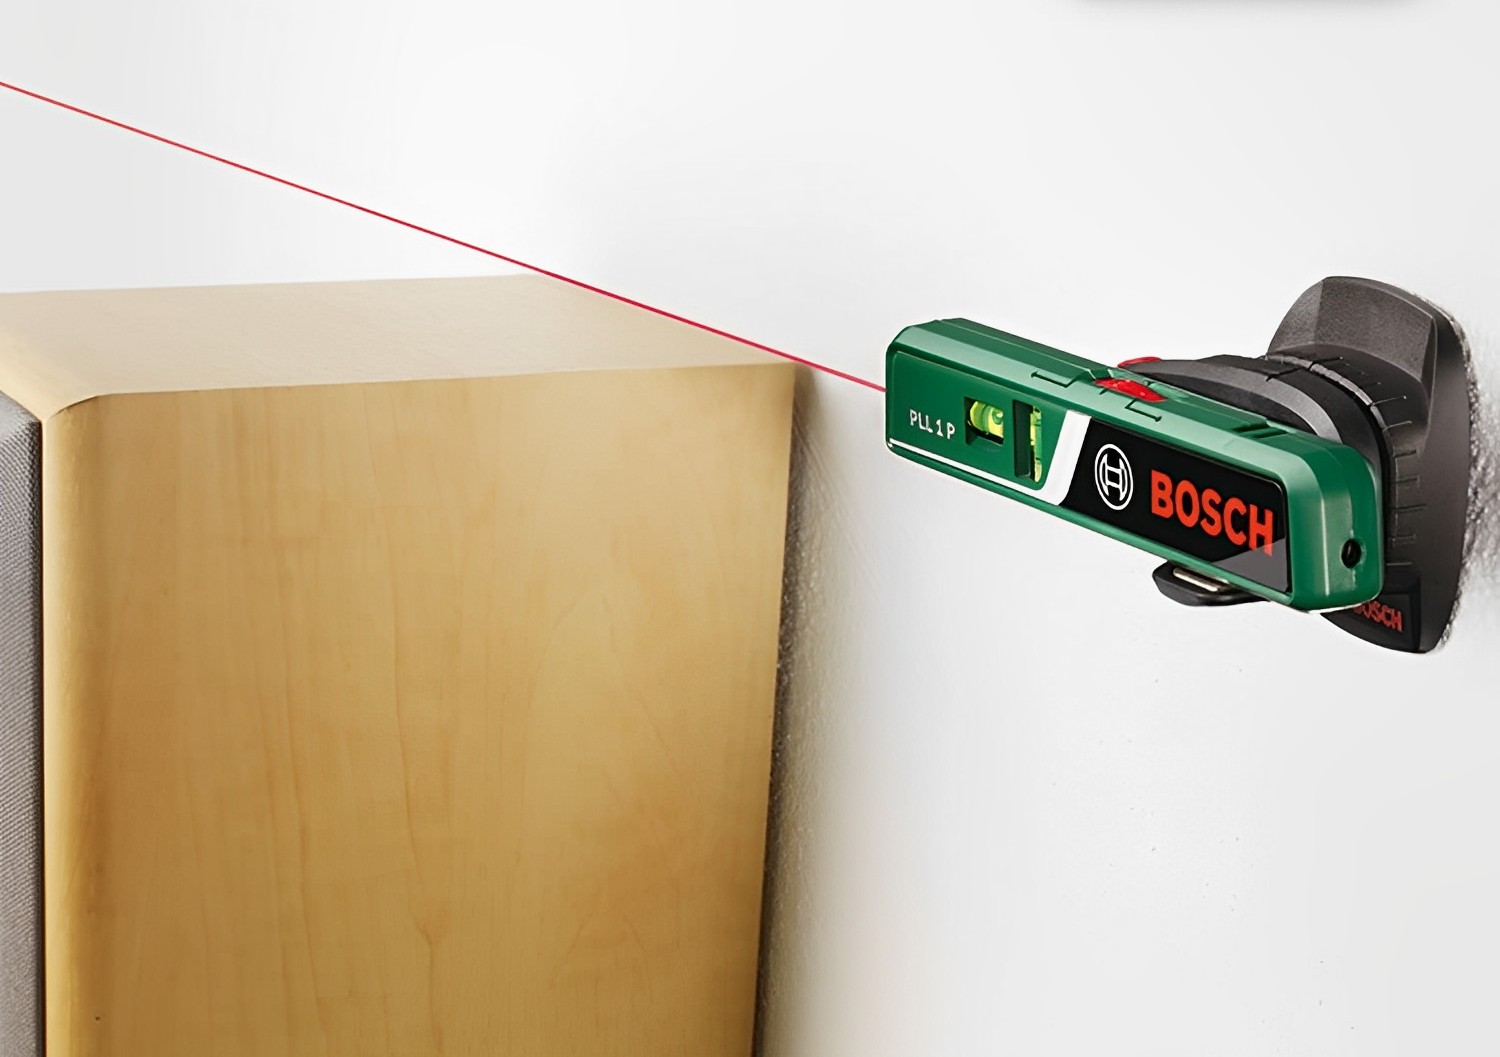 How Do You Attach A Laser Level To Wall